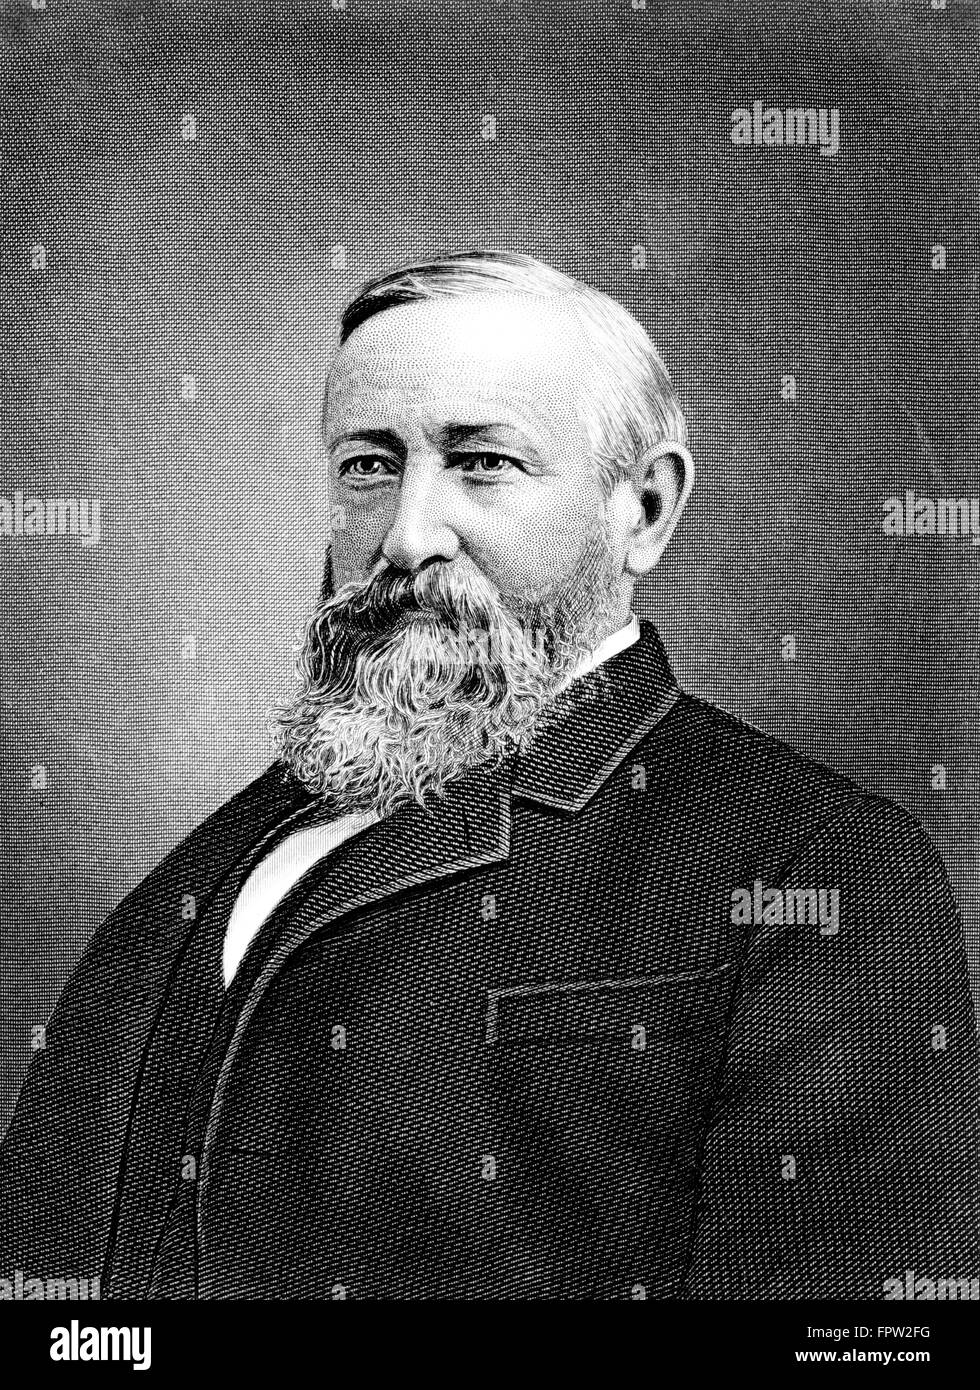 1880s 1890s PORTRAIT BENJAMIN HARRISON 1833 - 1901 23rd AMERICAN PRESIDENT REPUBLICAN AT PAN AMERICAN CONFERENCE Stock Photo